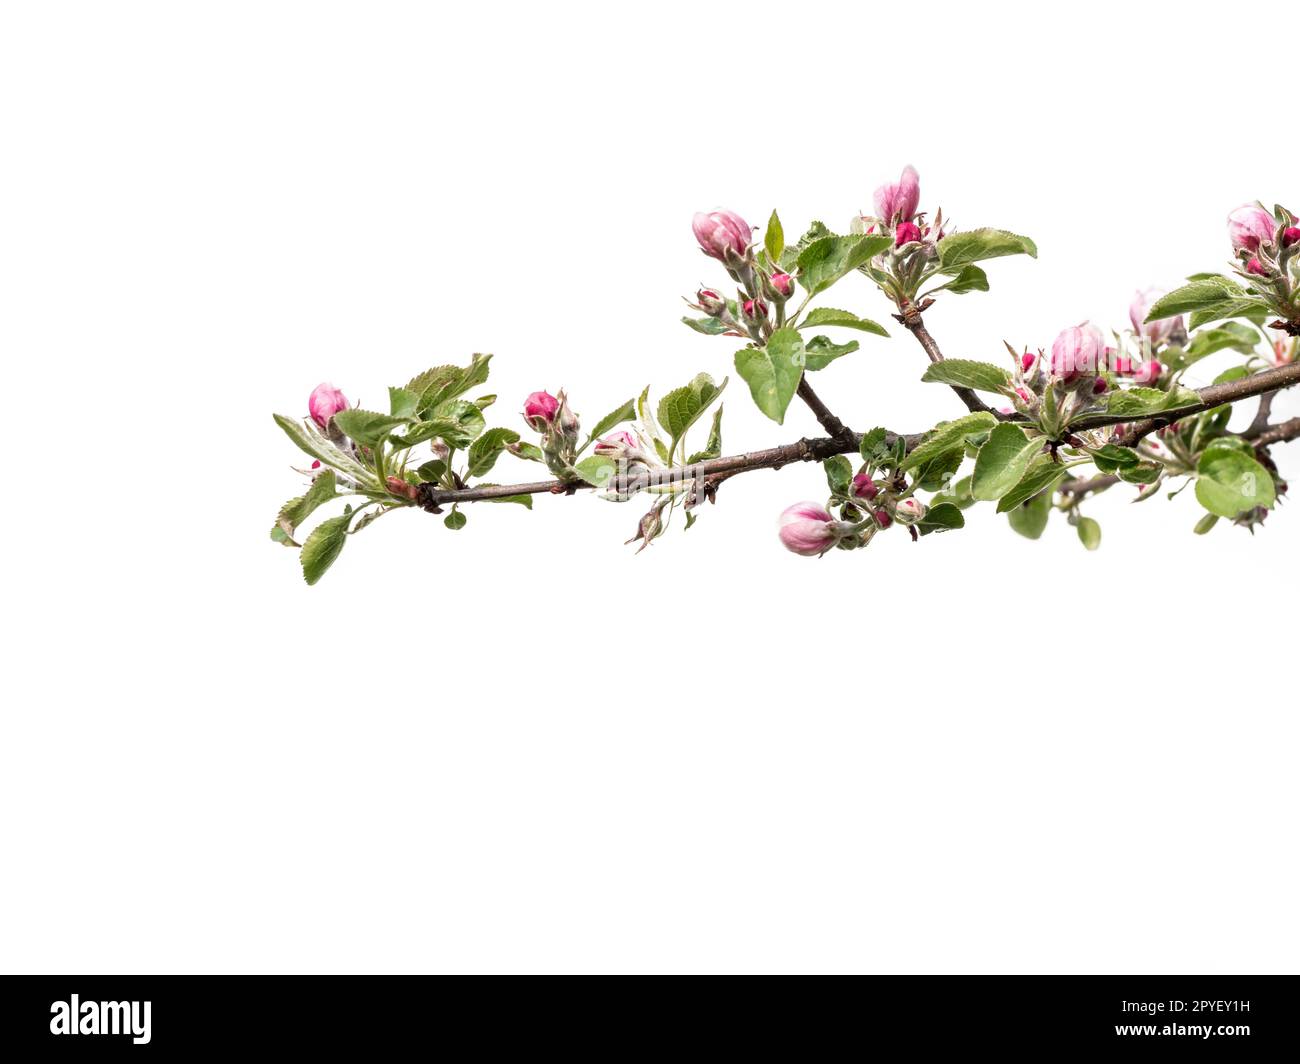 Apple tree branch with buds and flowers in blossom on white background Stock Photo